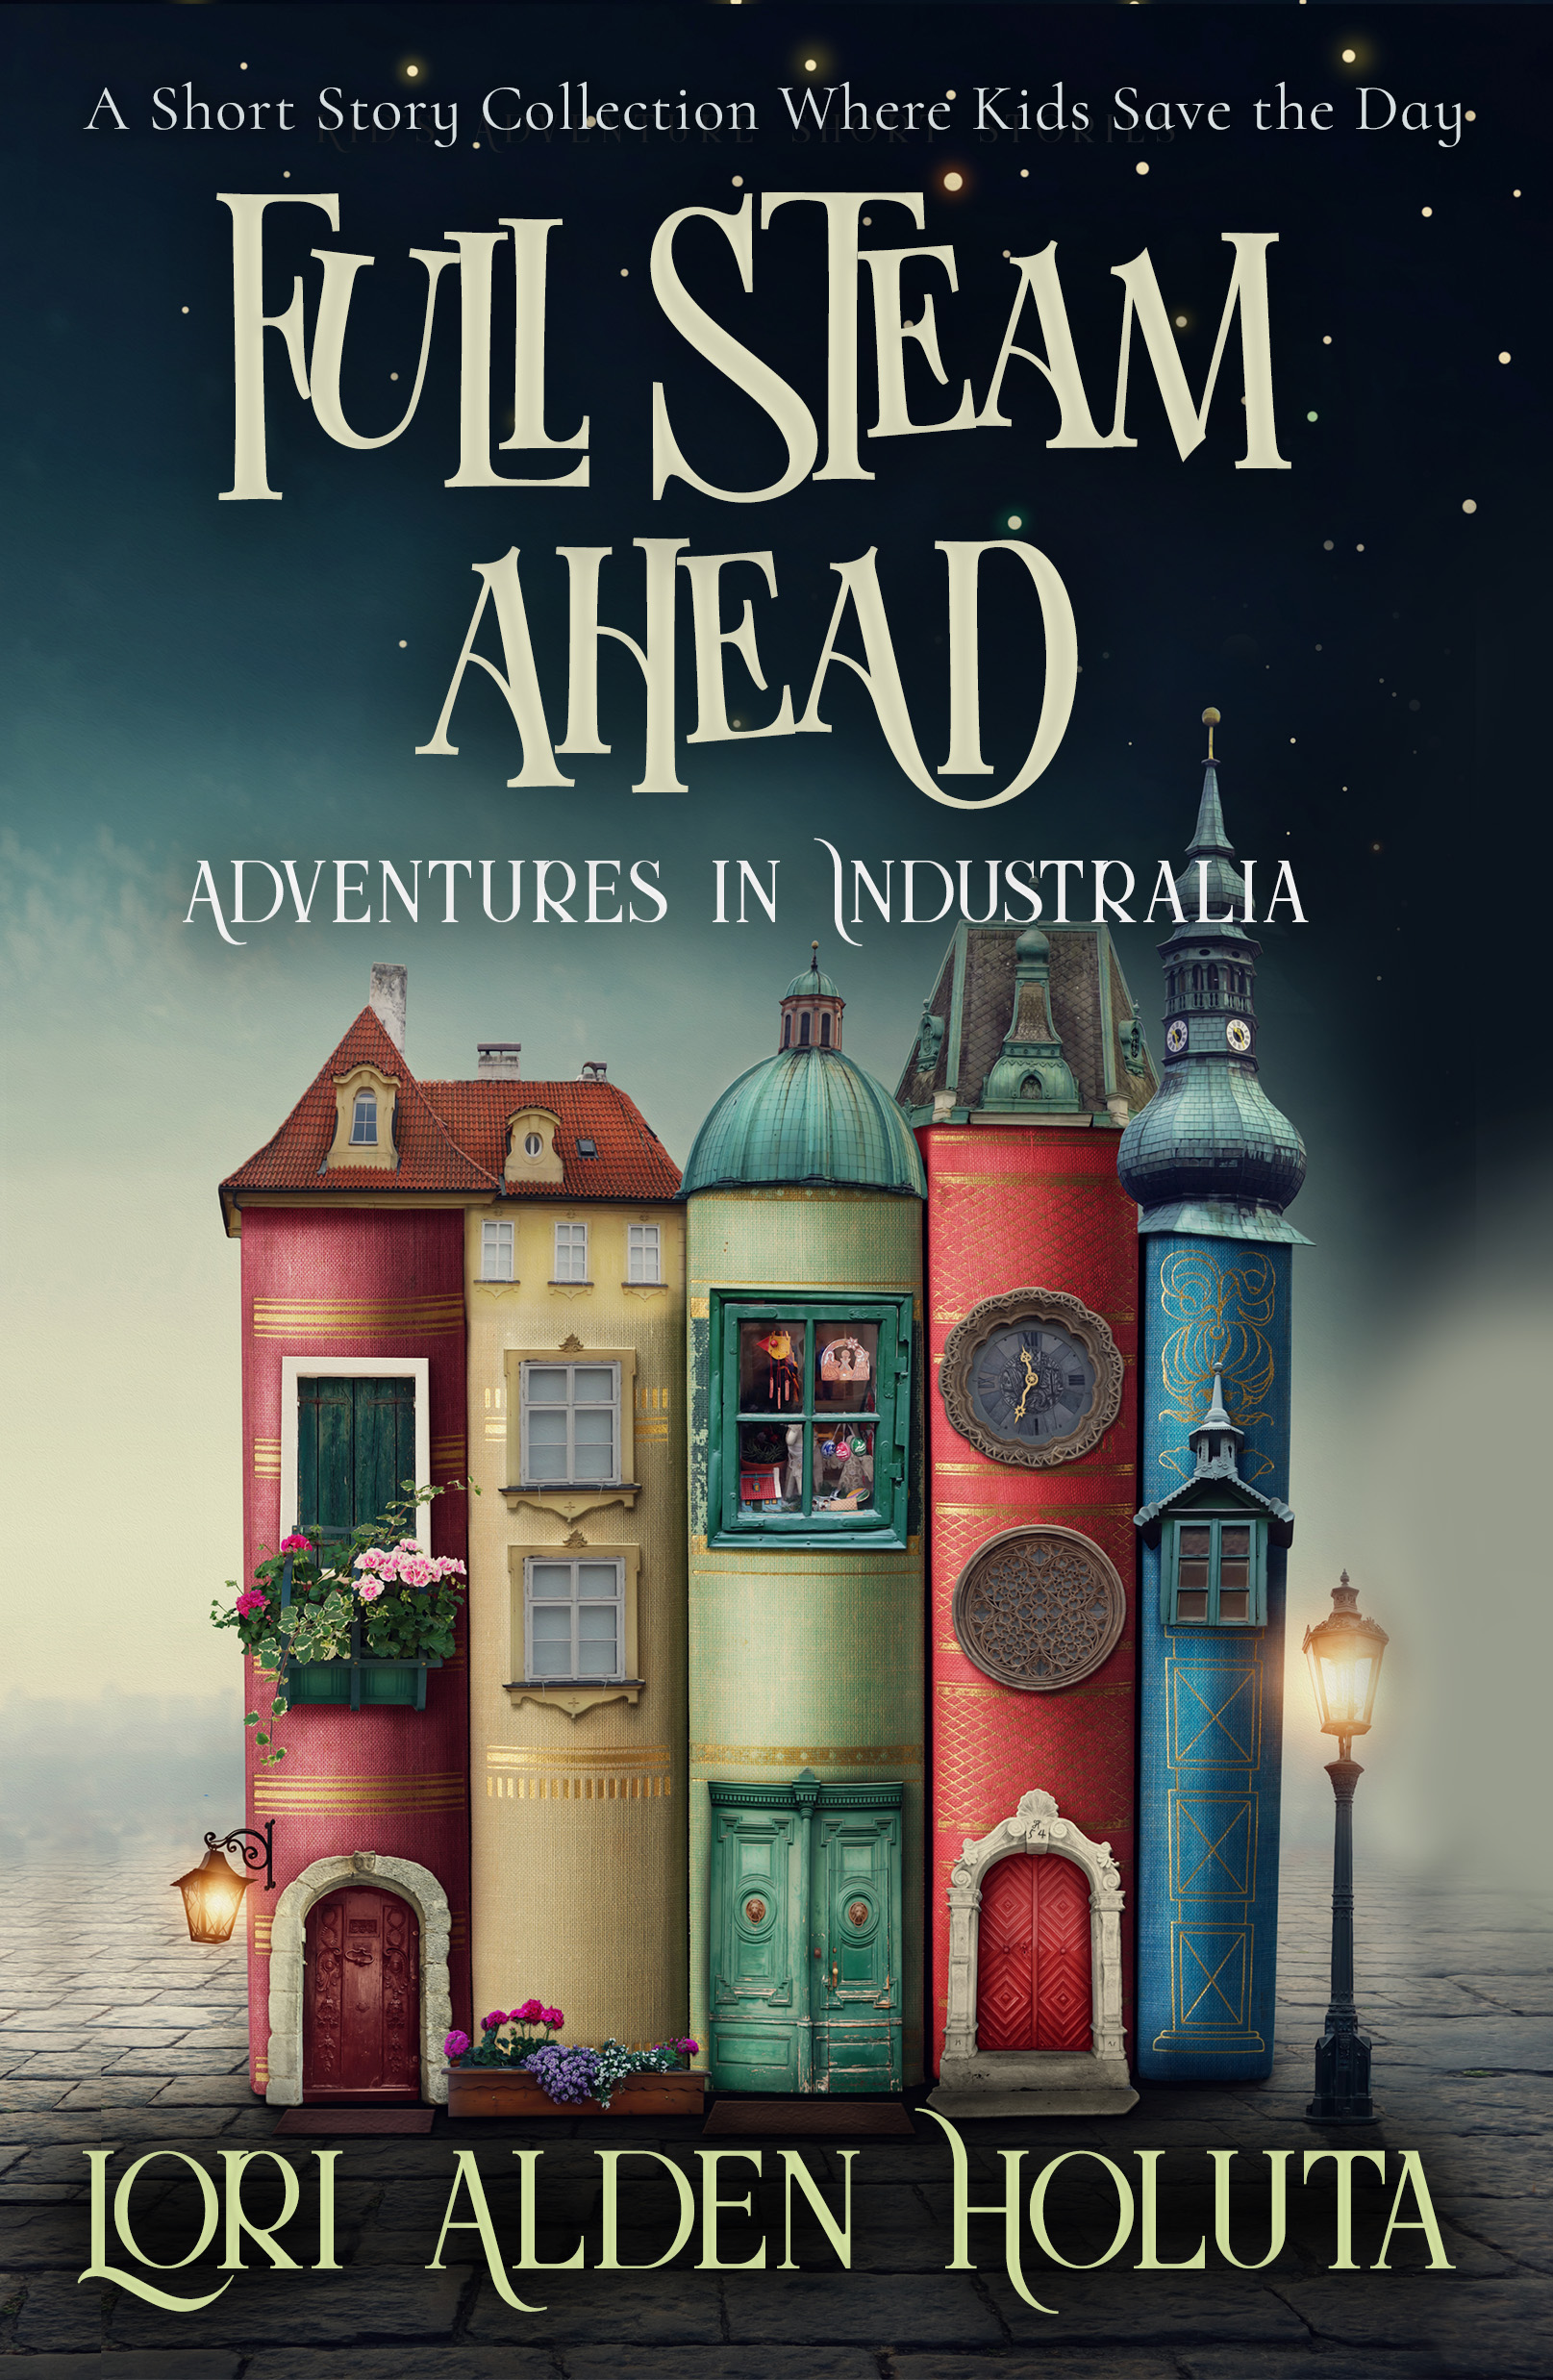 Full Steam Ahead and other books by Lori Alden Holuta are available at many online booksellers. Click the book cover for universal links.